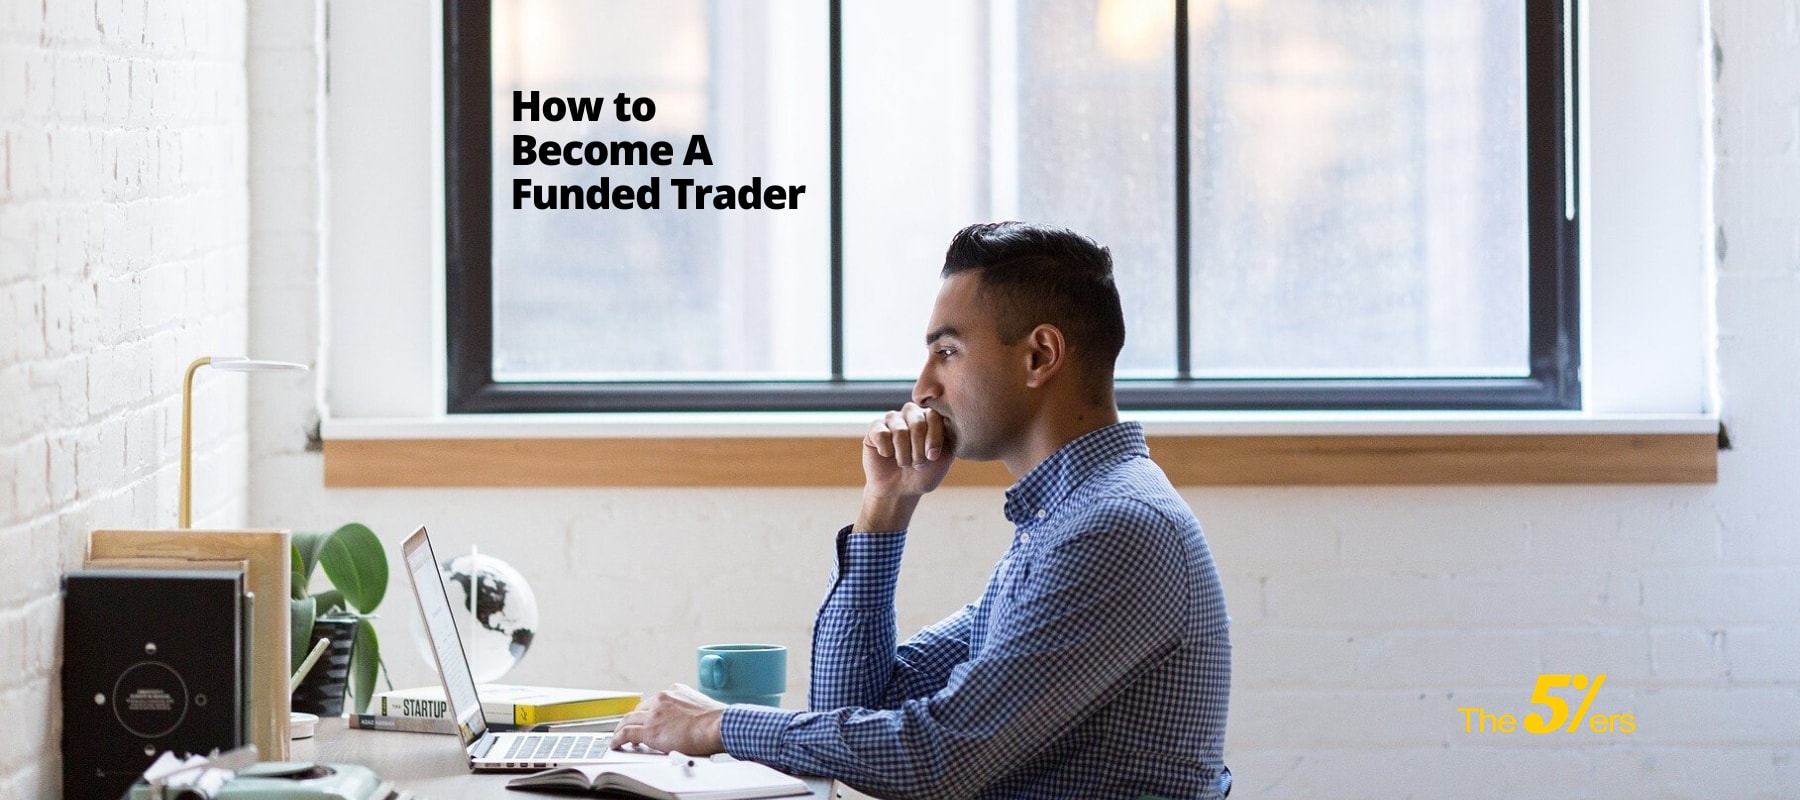 Funded Trading – How to Become A Funded Trader